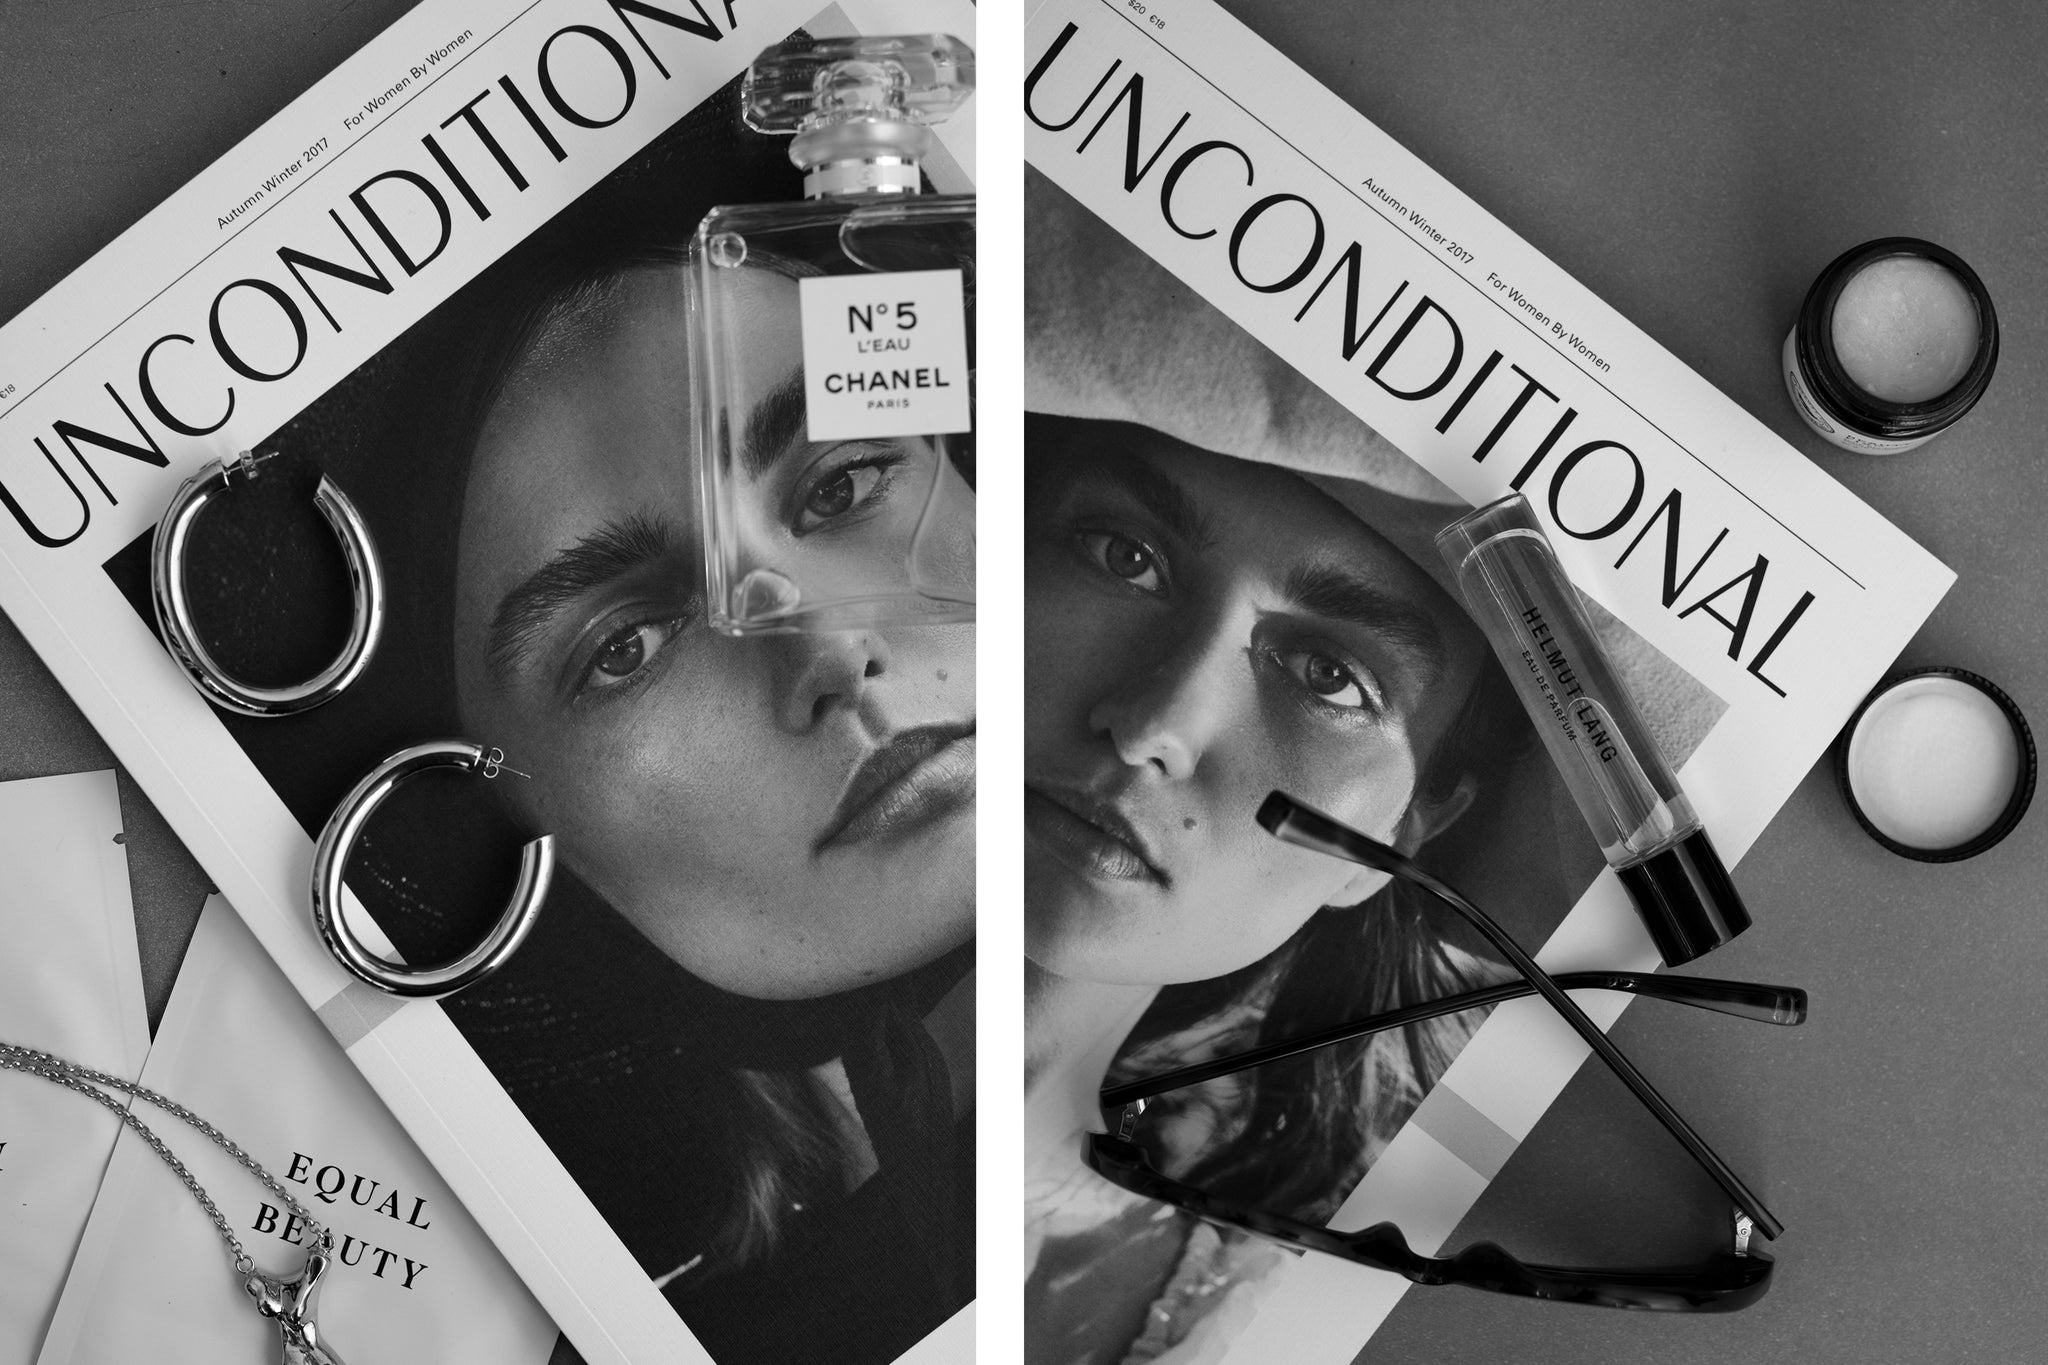 UNCONDITIONAL MAGAZINE NOW ONLINE AT THE UNDONE